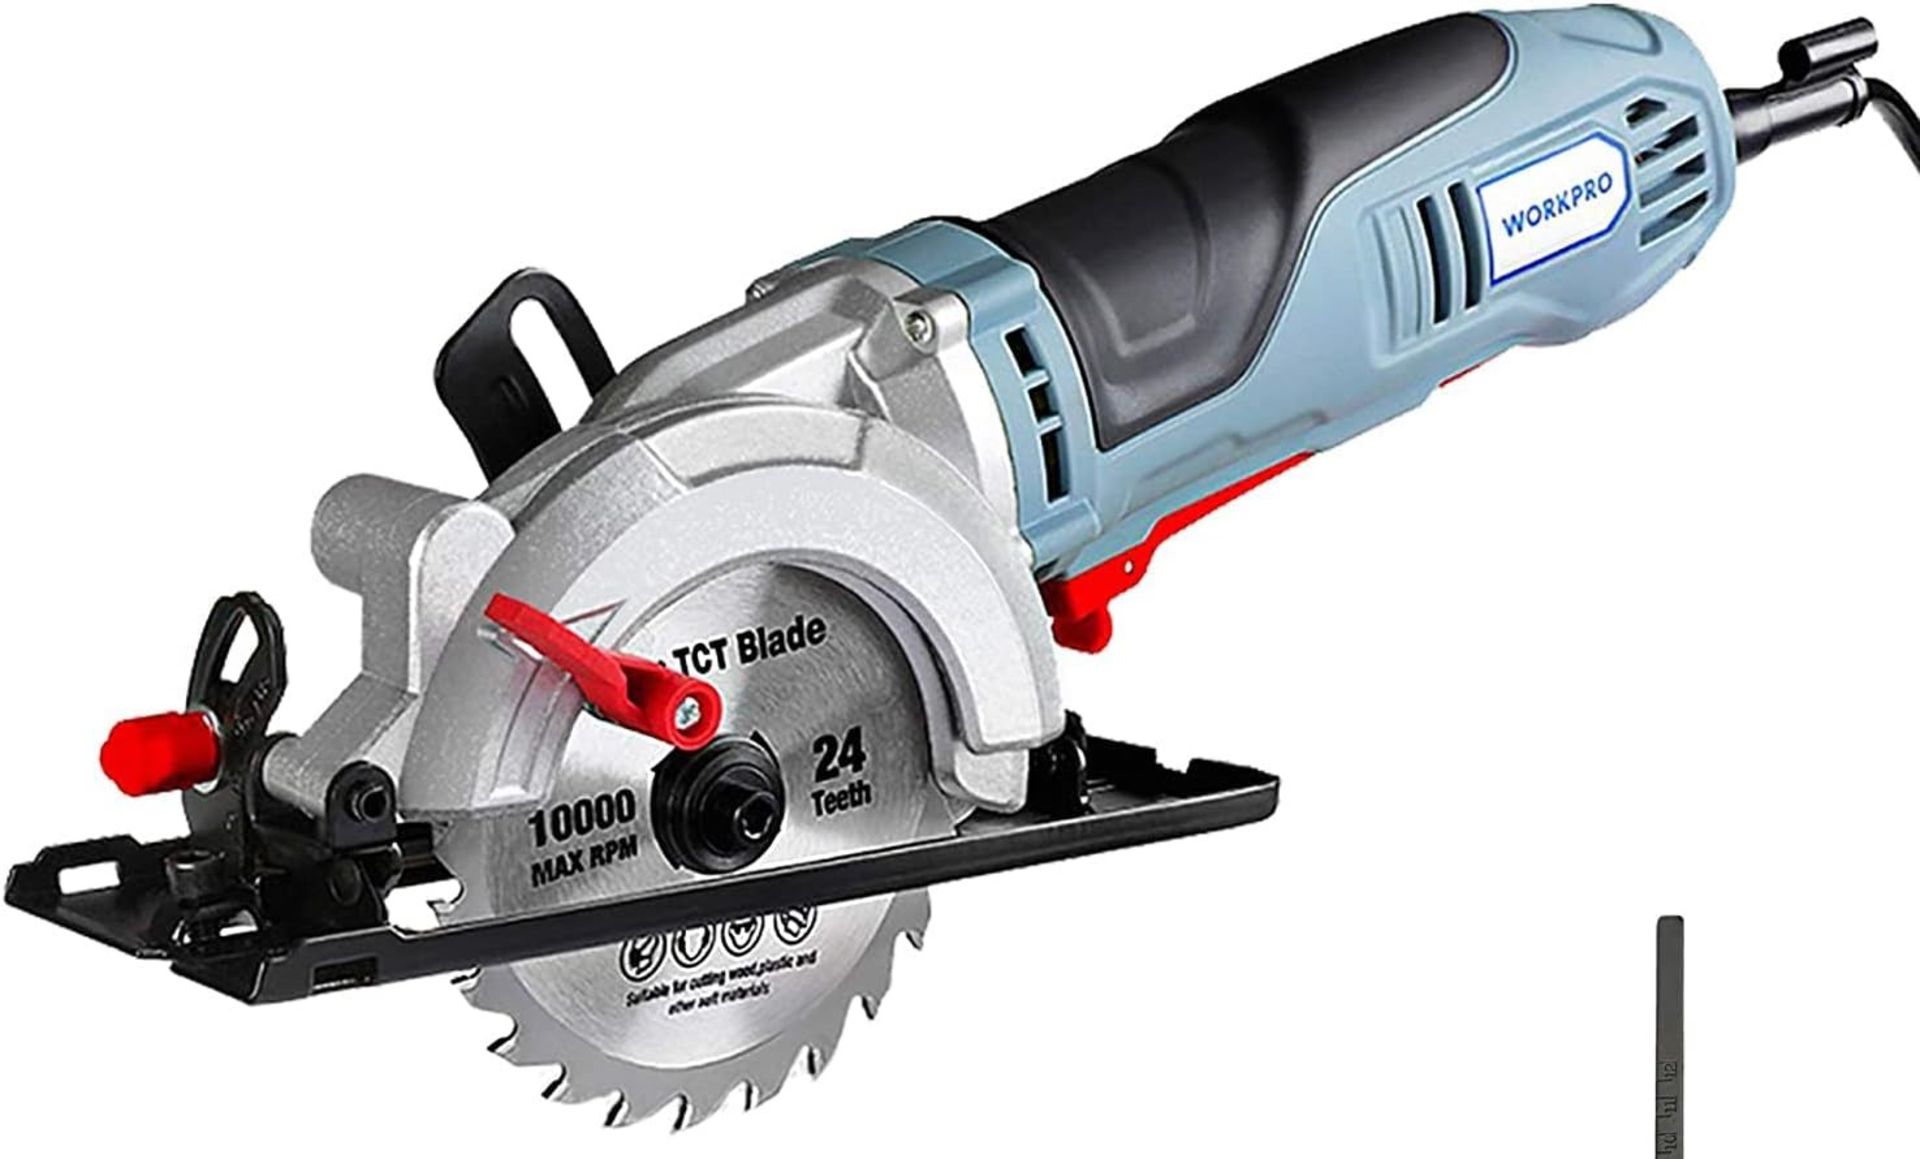 RRP £49.99 WORKPRO Mini Circular Saw 750W 4700RPM for Wood, Metal, Tile and Plastic Cutting